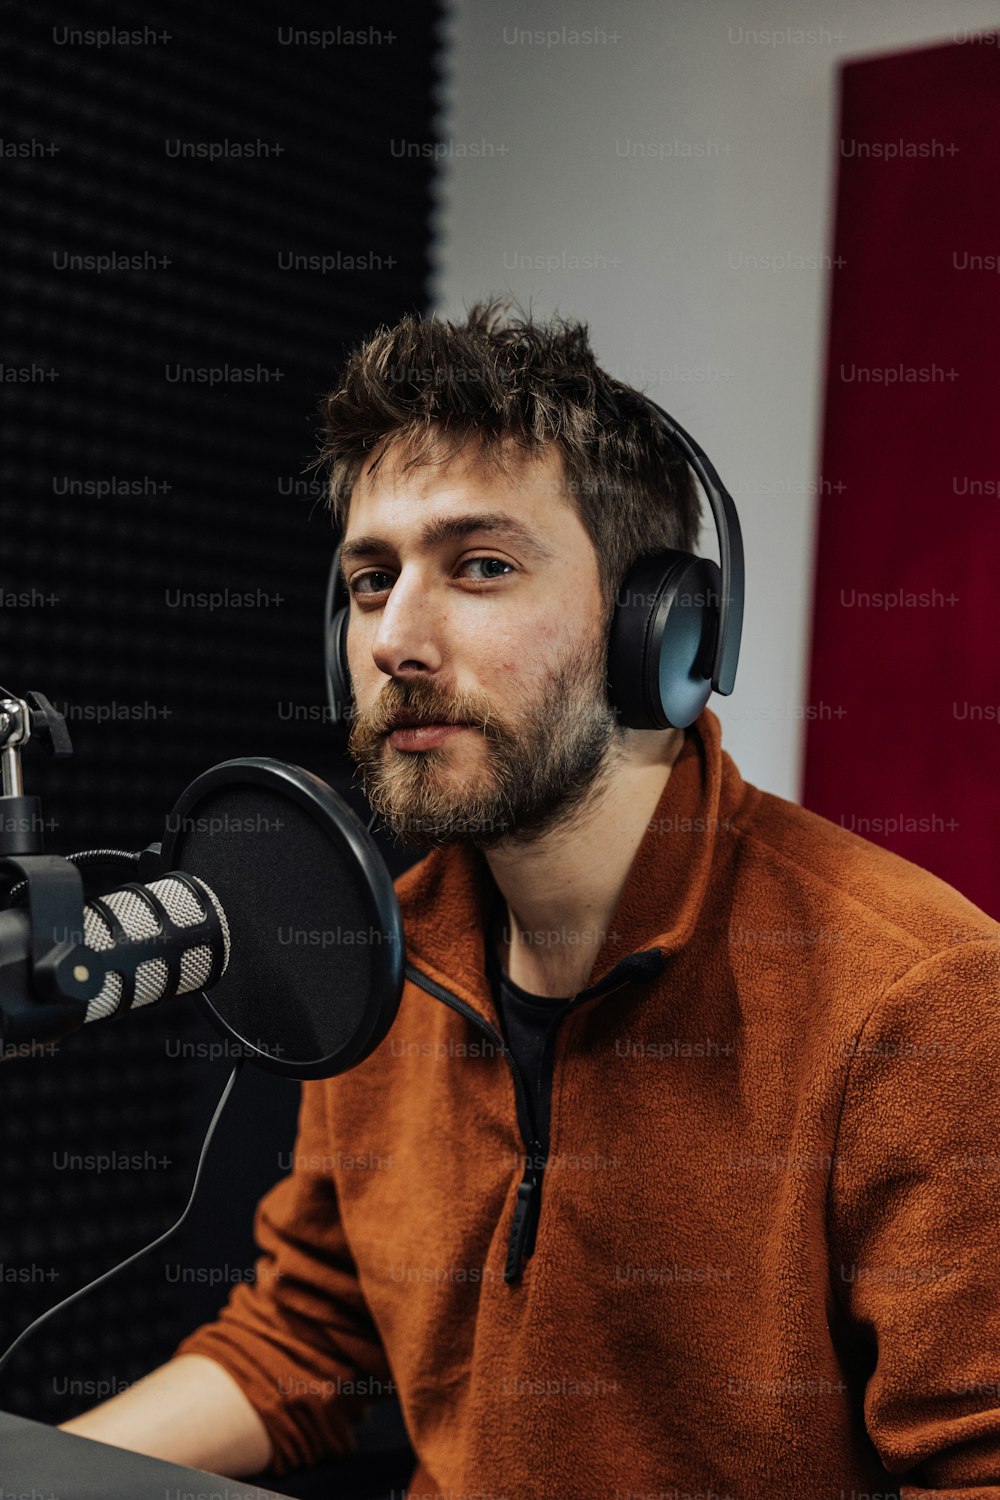 a man wearing headphones sitting in front of a microphone